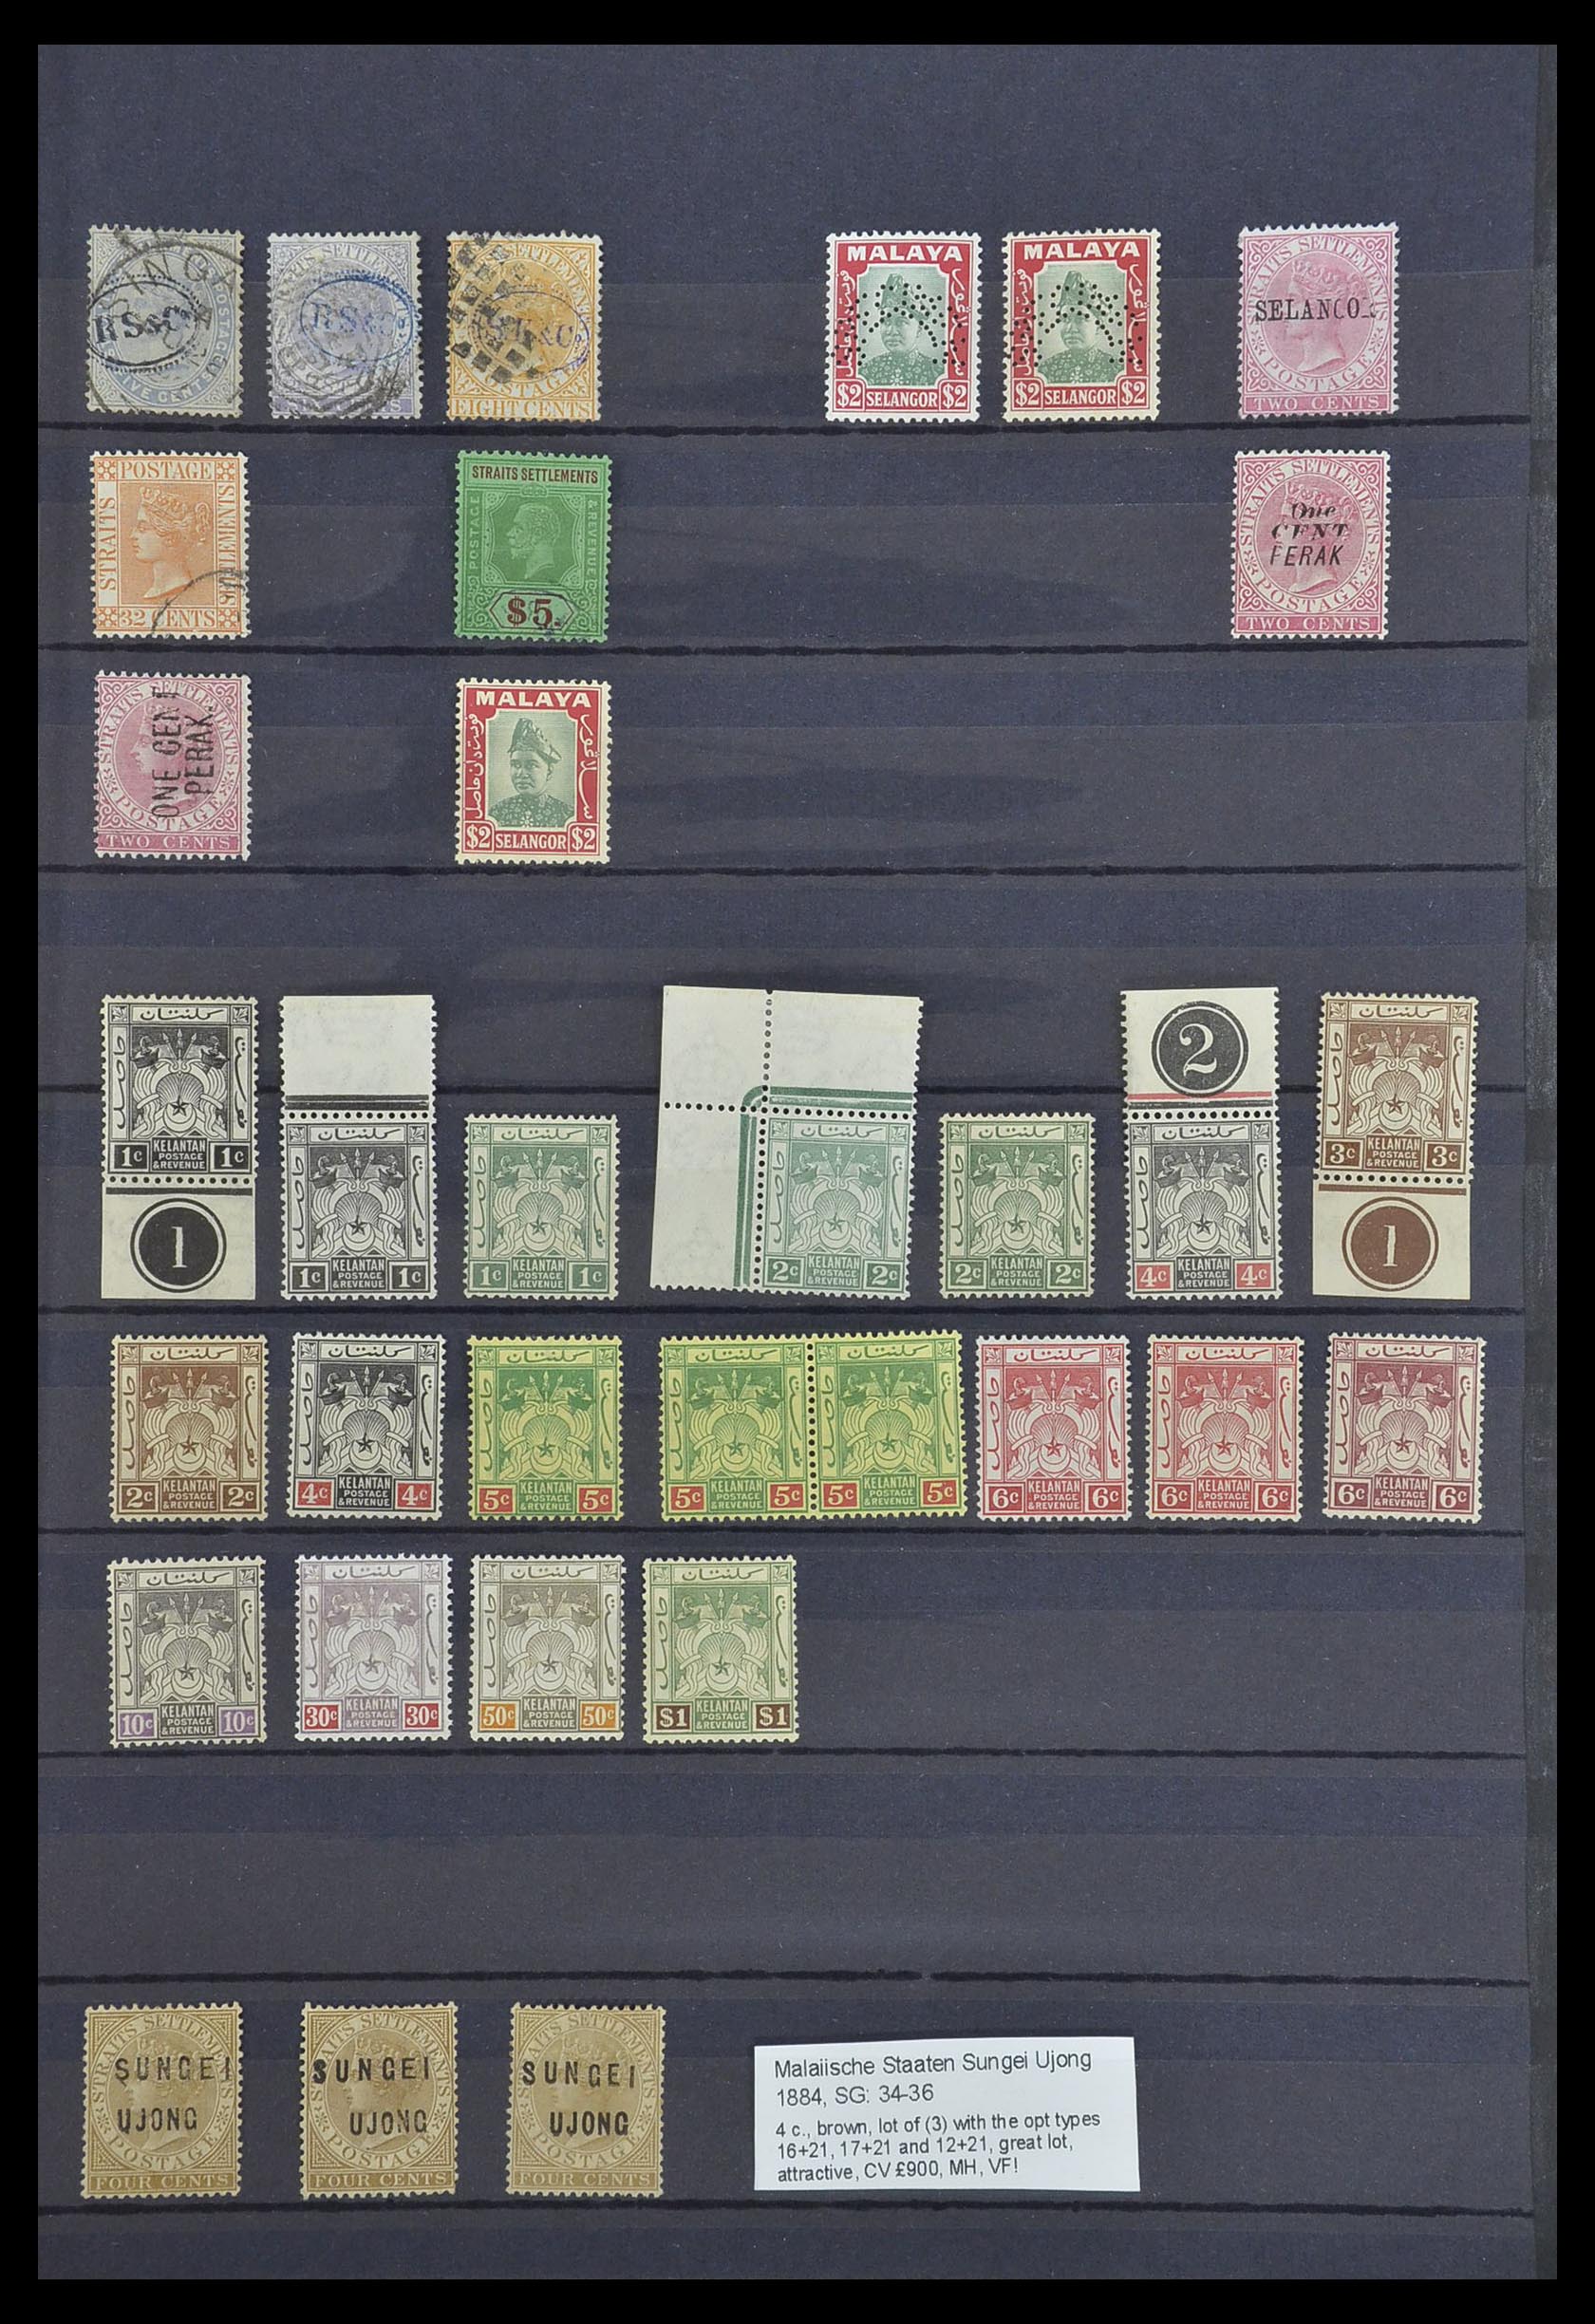 33640 031 - Stamp collection 33640 British Commonwealth key items 1853-1953.